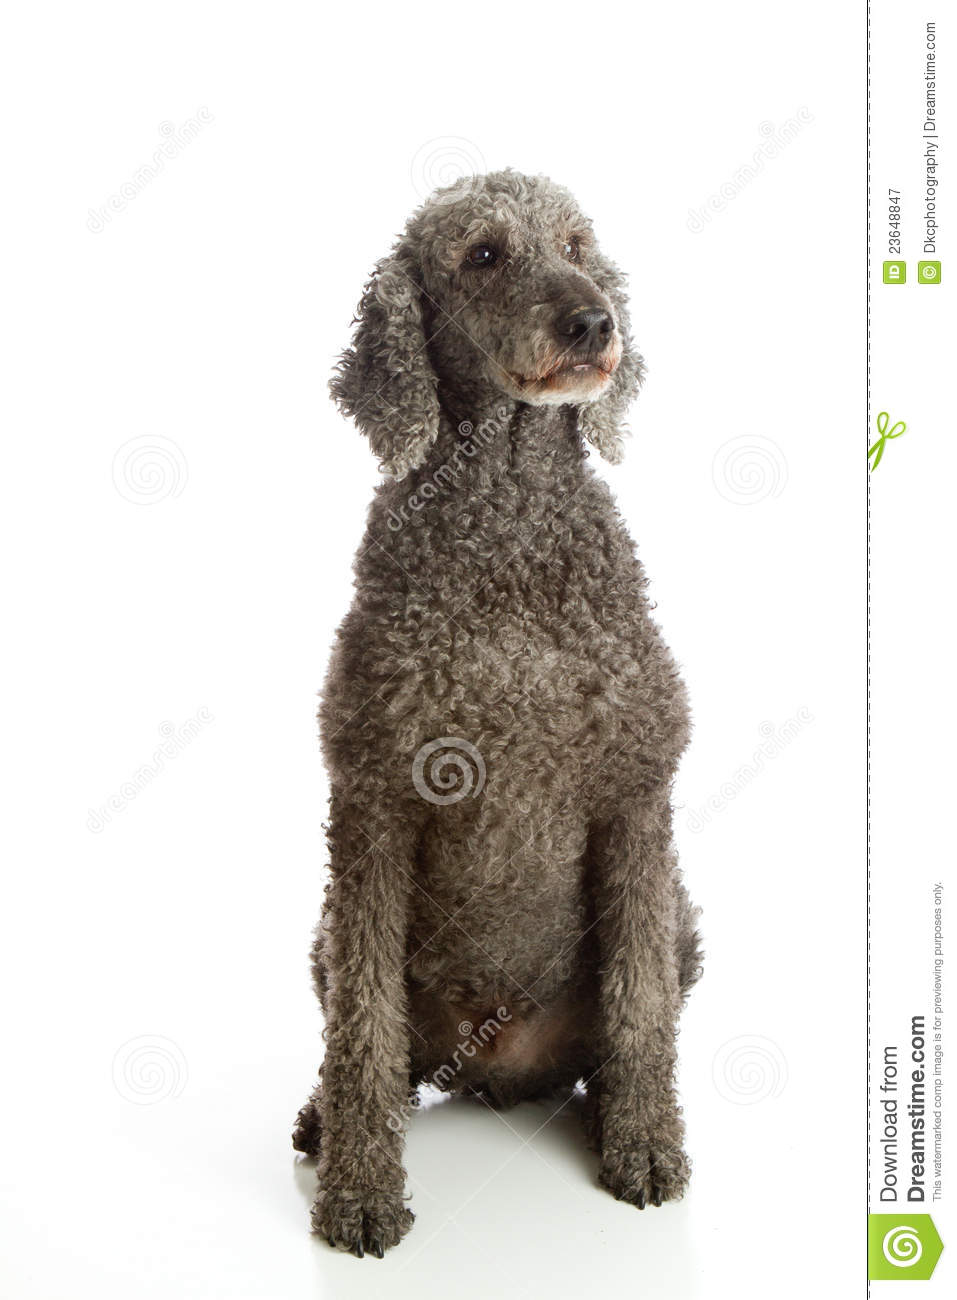 Standard Poodle Grey Royalty Free Stock Photography   Image  23648847